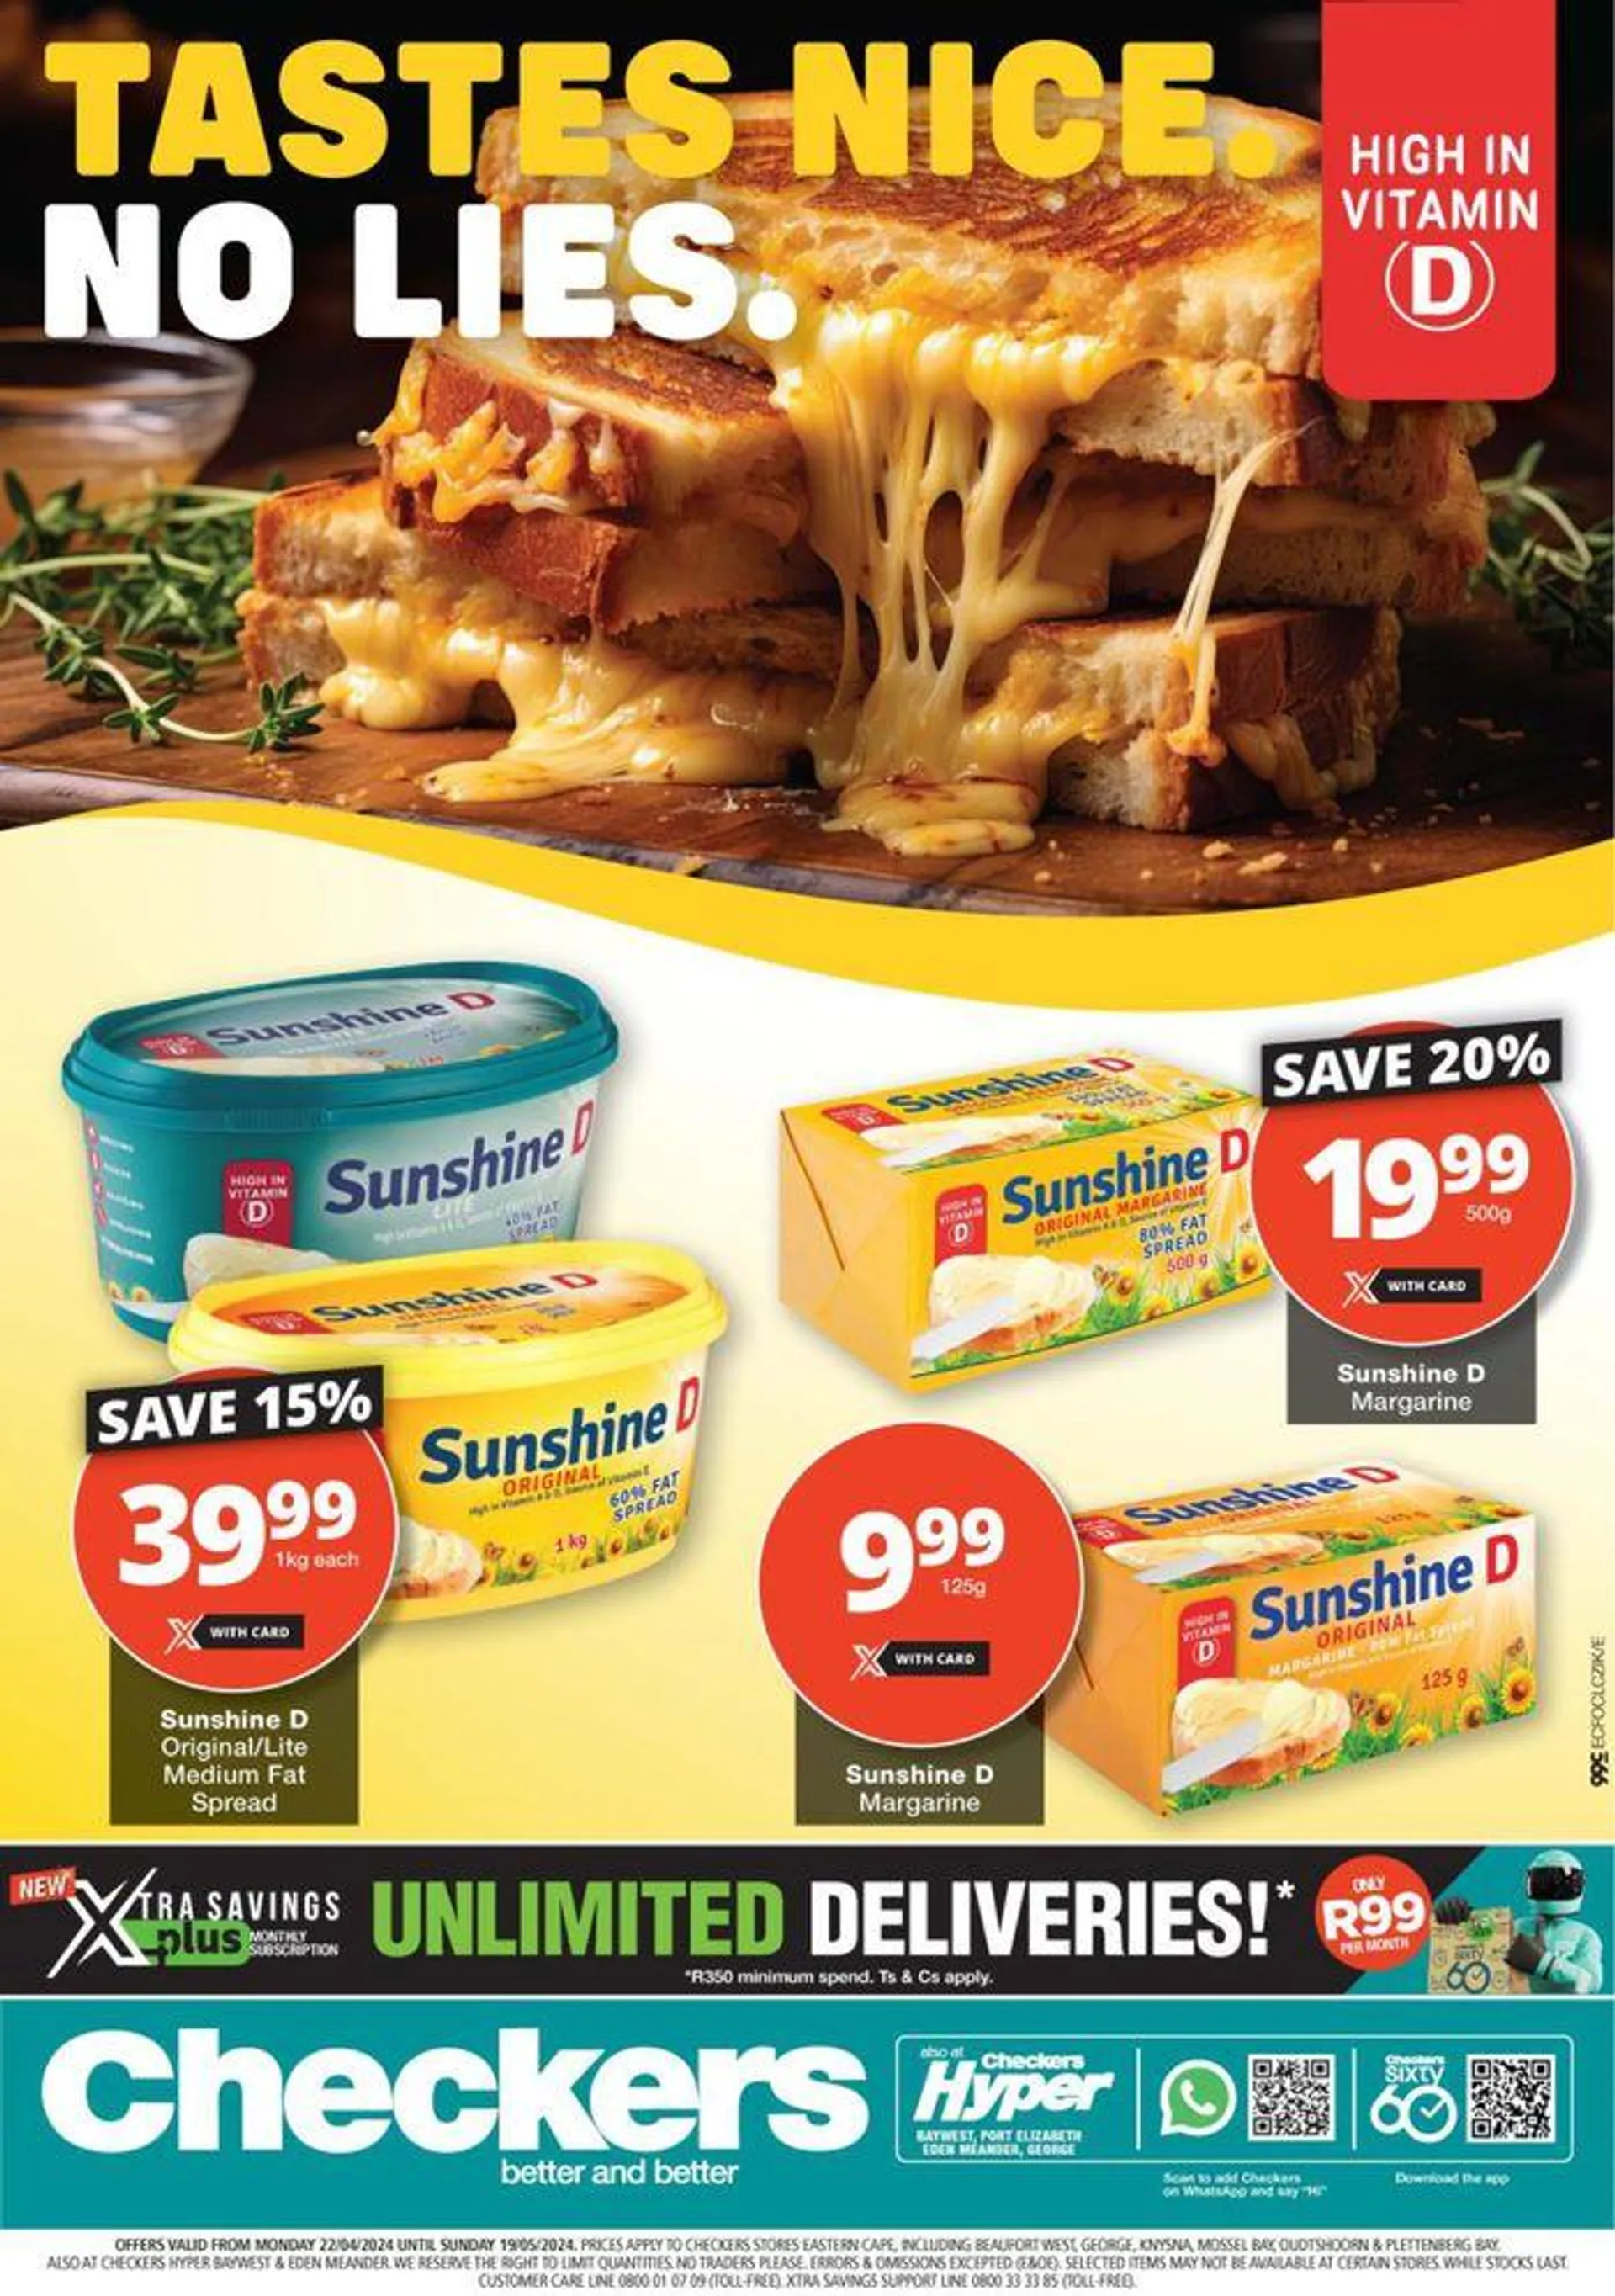 Checkers Sunshine D Promotion 22 April - 19 May - 1